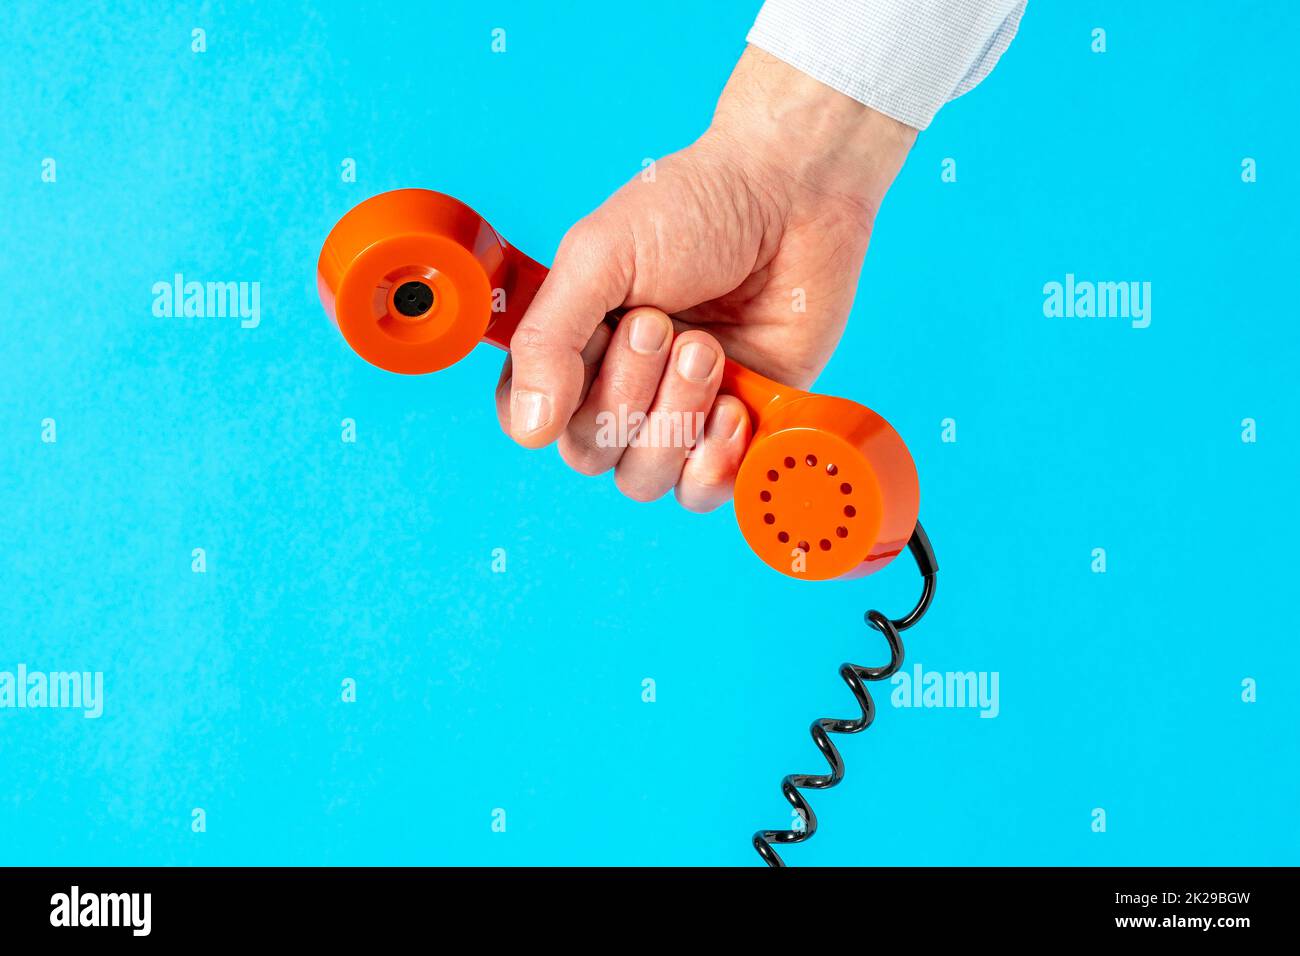 Hand holding old telephone receiver over blue background Stock Photo